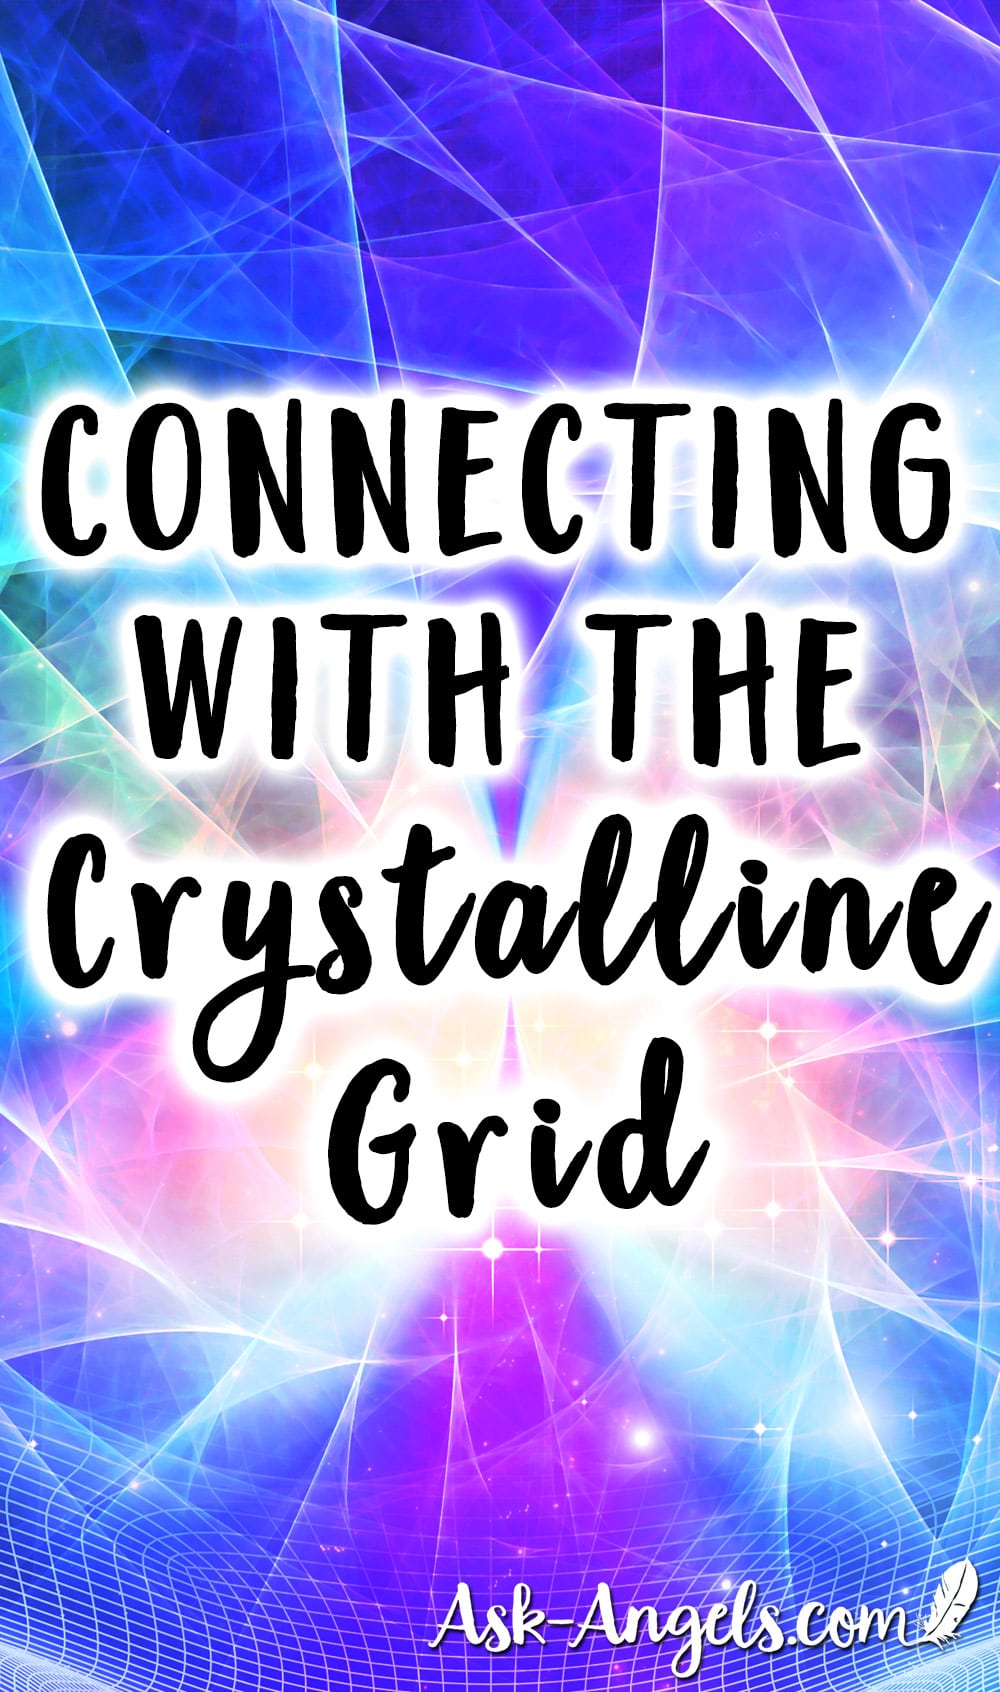 Connecting With The Crystalline Grid